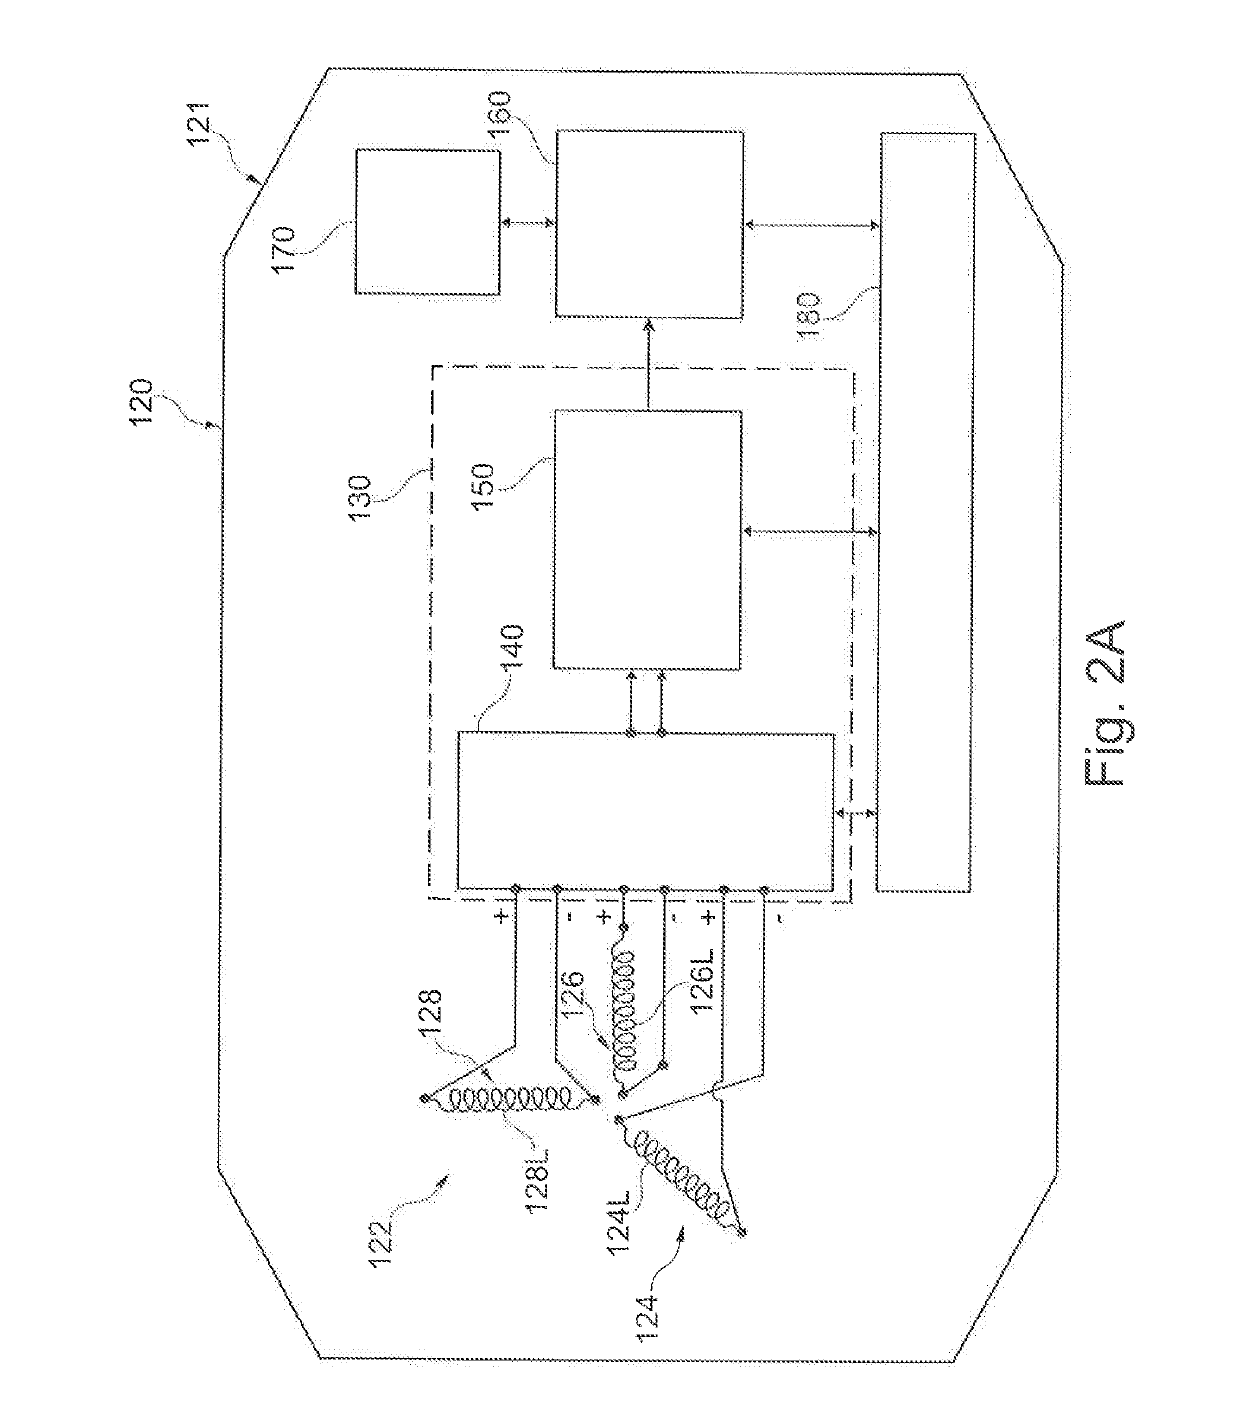 Mobile device, base structure, system and method for recovery of 3D parameters of low frequency magnetic field vectors